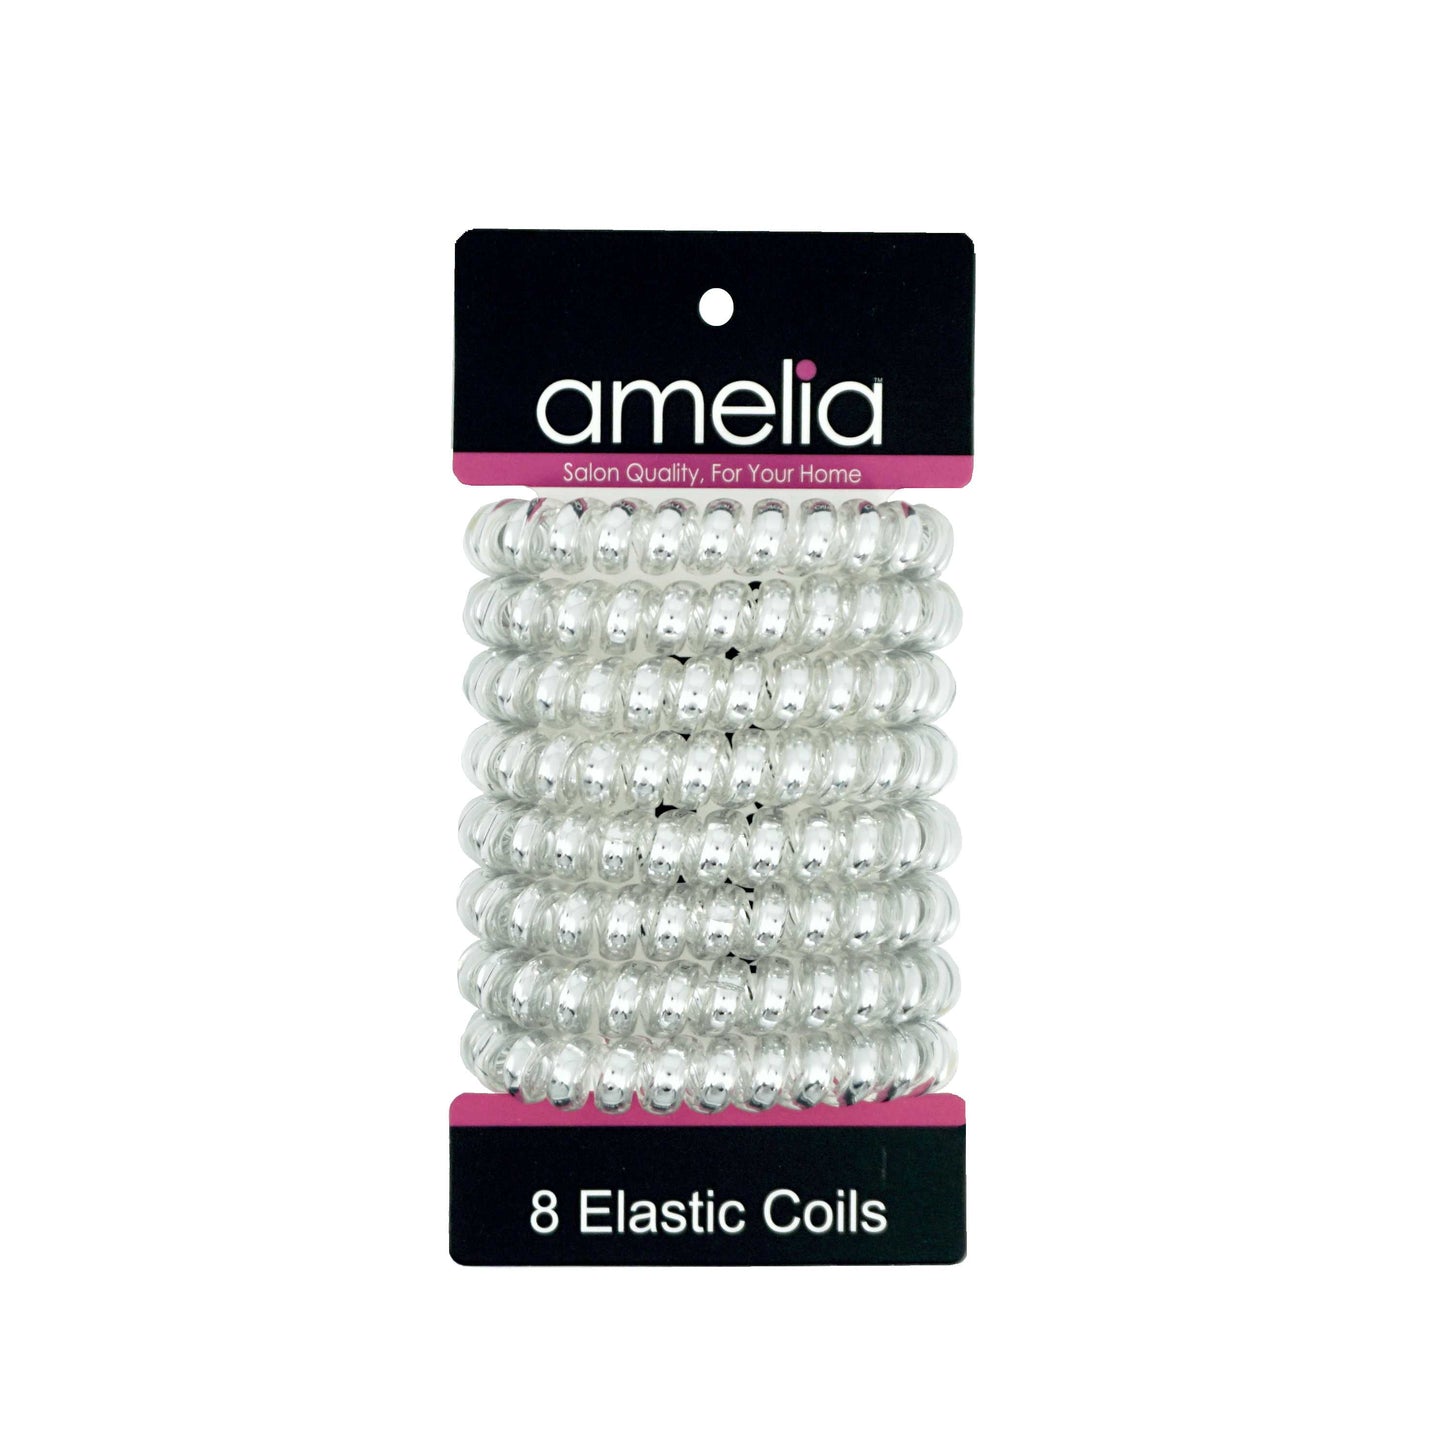 Amelia Beauty Products 8 Large Smooth Shiny Center Elastic Hair Coils, 2. 5in Diameter Thick Spiral Hair Ties, Gentle on Hair, Strong Hold and Minimizes Dents and Creases, Silver